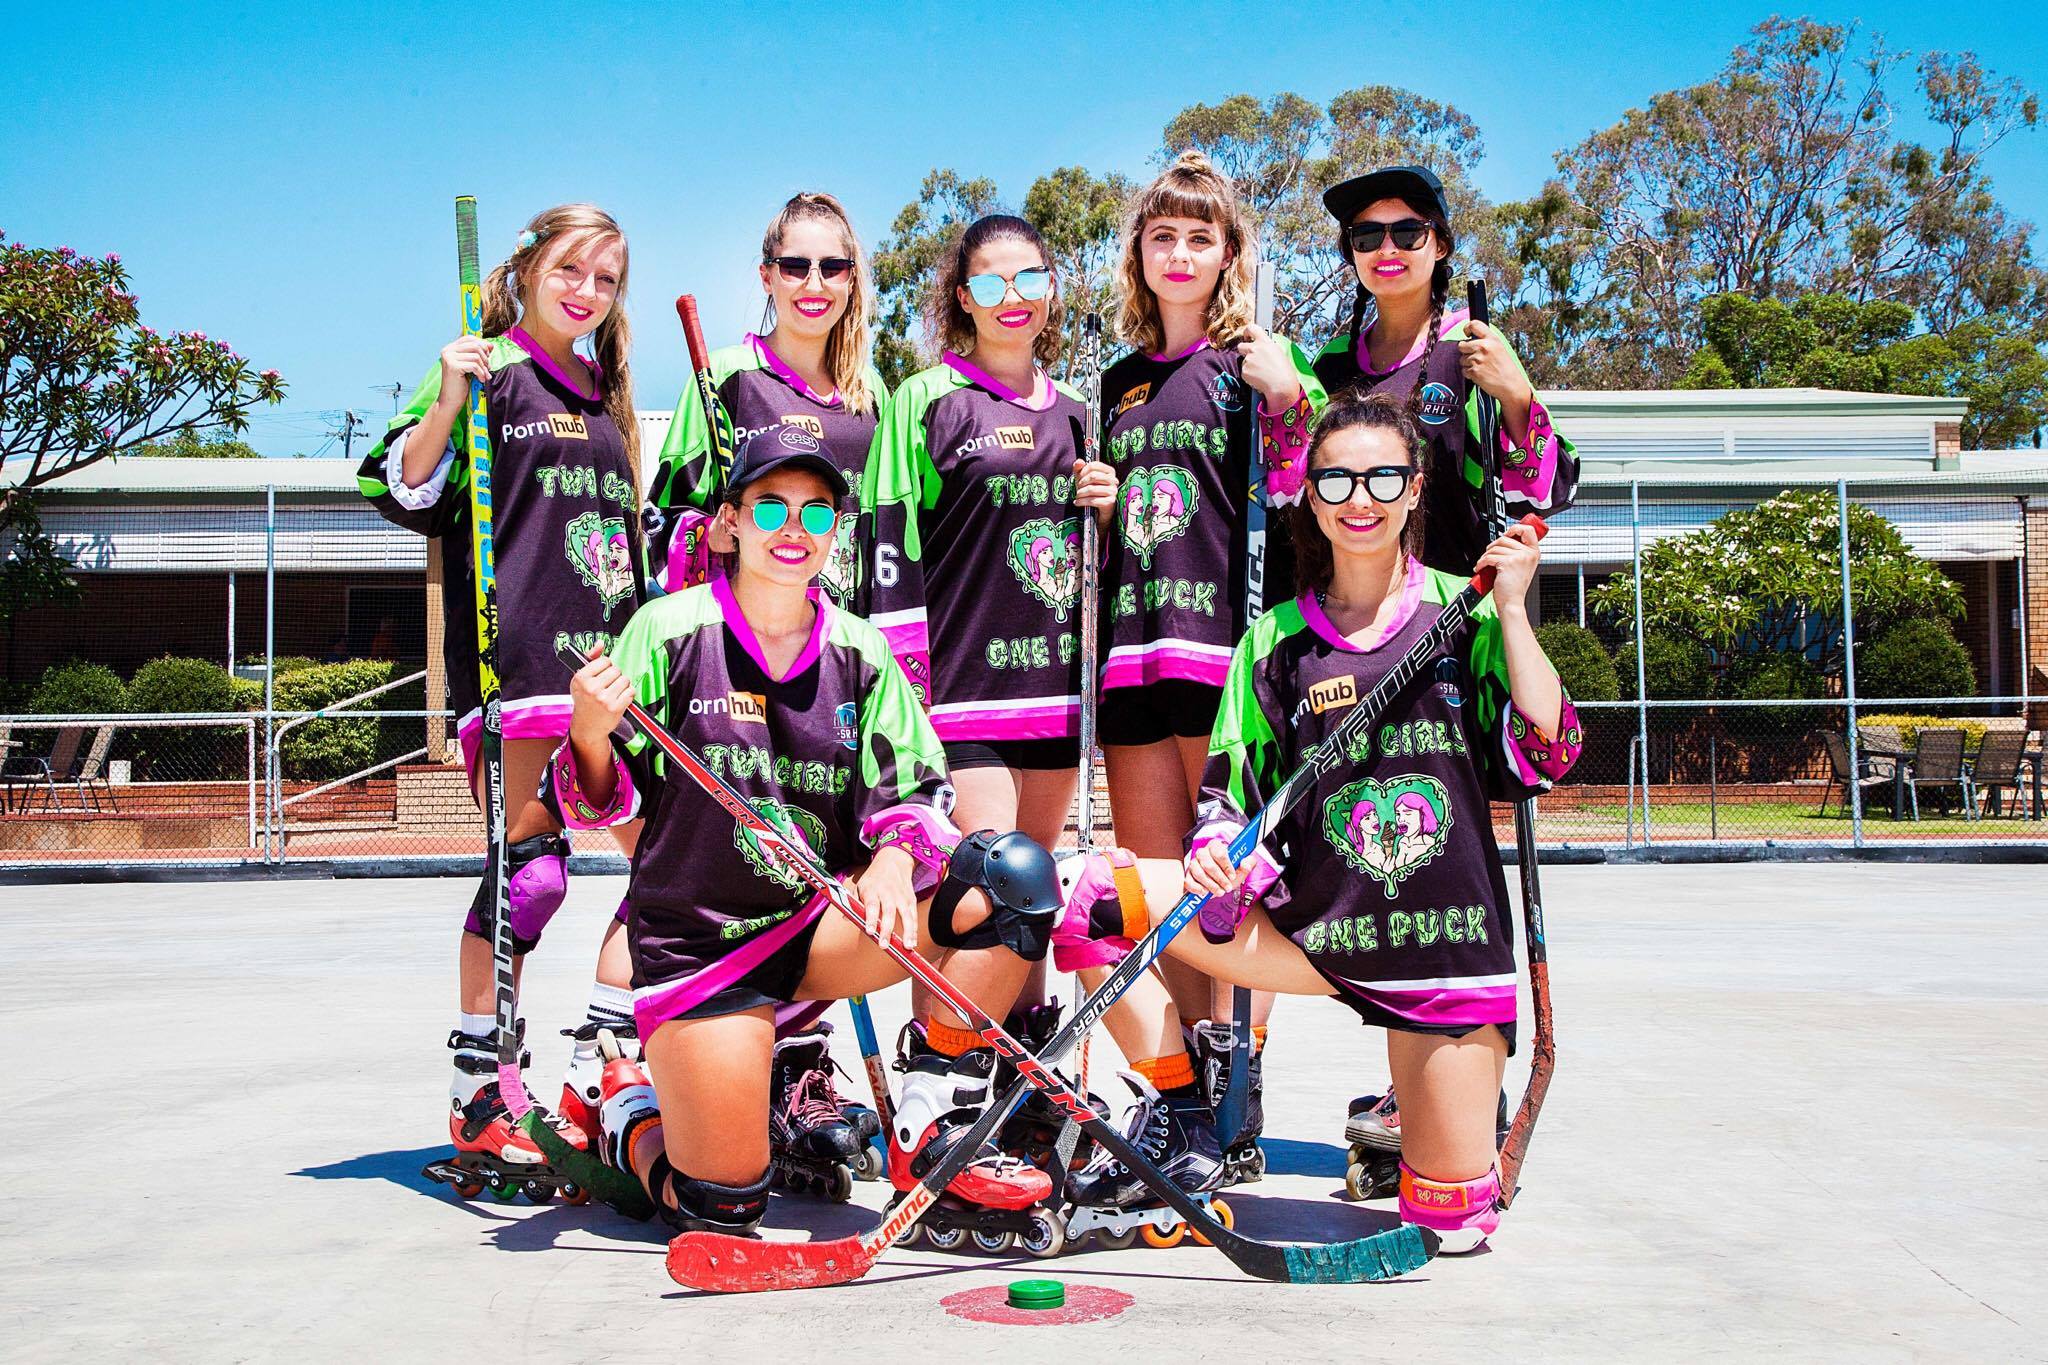 Girls Team - How a Perth Hockey Team Got Sponsored By the World's Biggest Porn Site